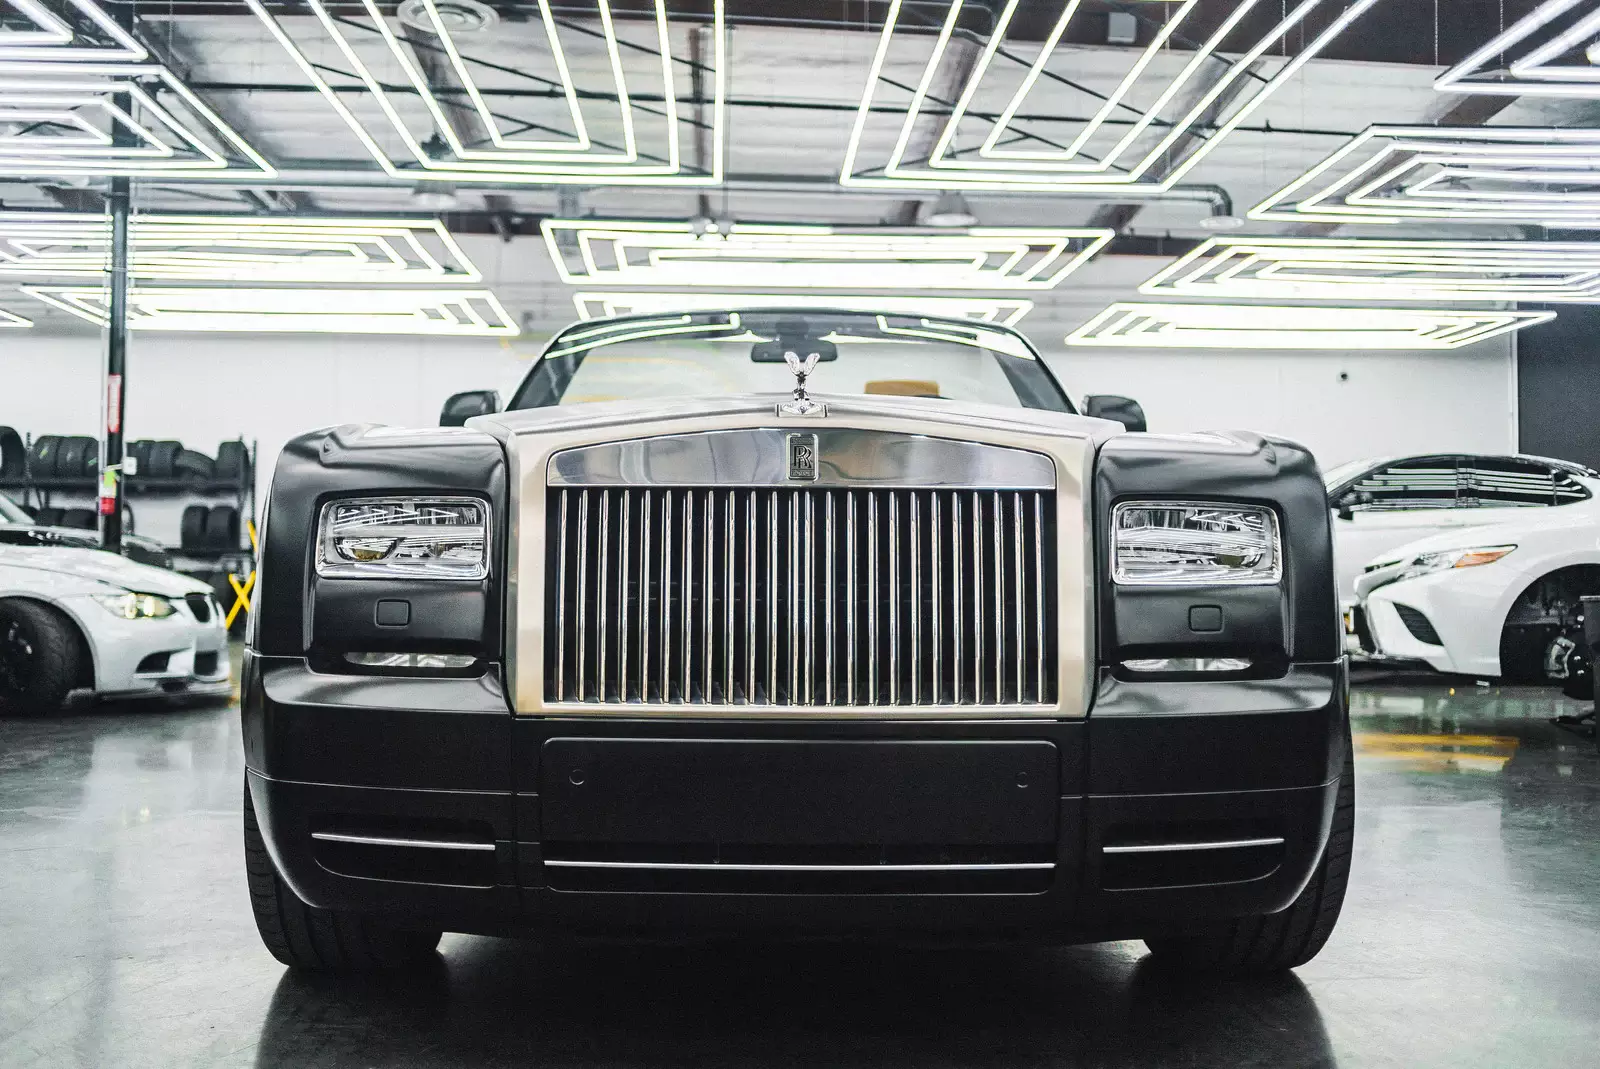 The RollsRoyce Ghost A magic carpet ride that costs as much as a house   Ars Technica